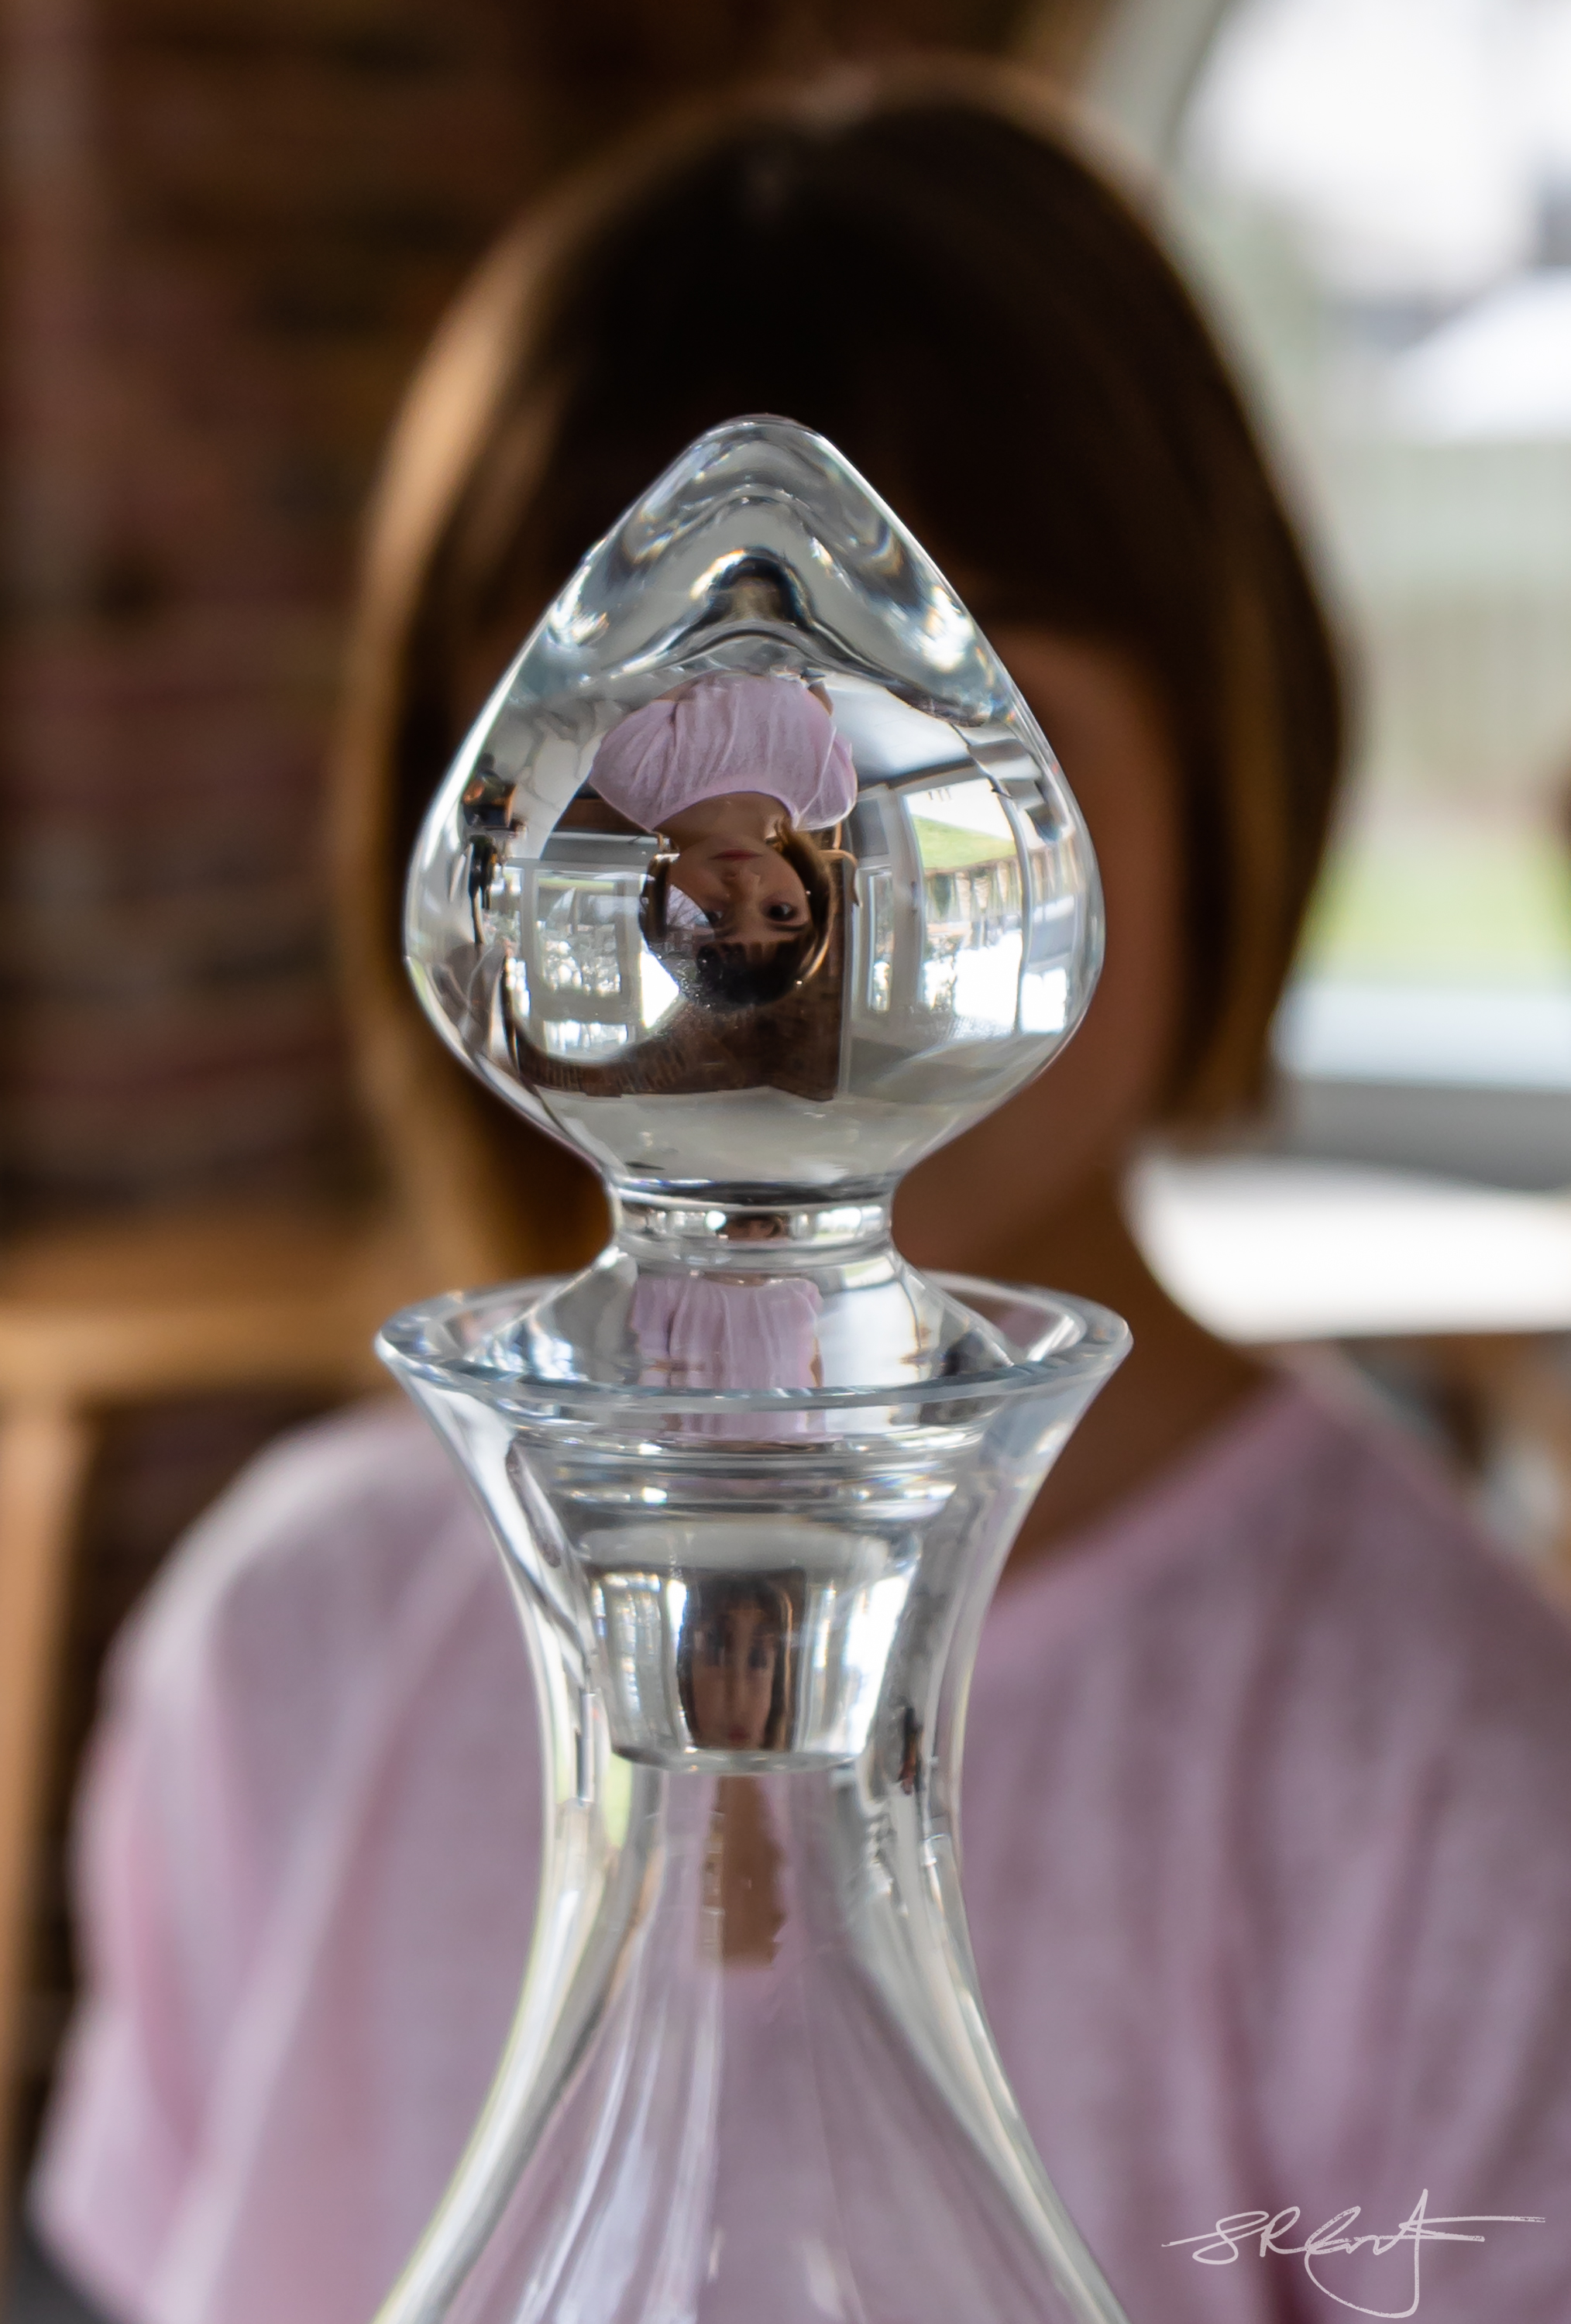 Reflection in a wine decanter